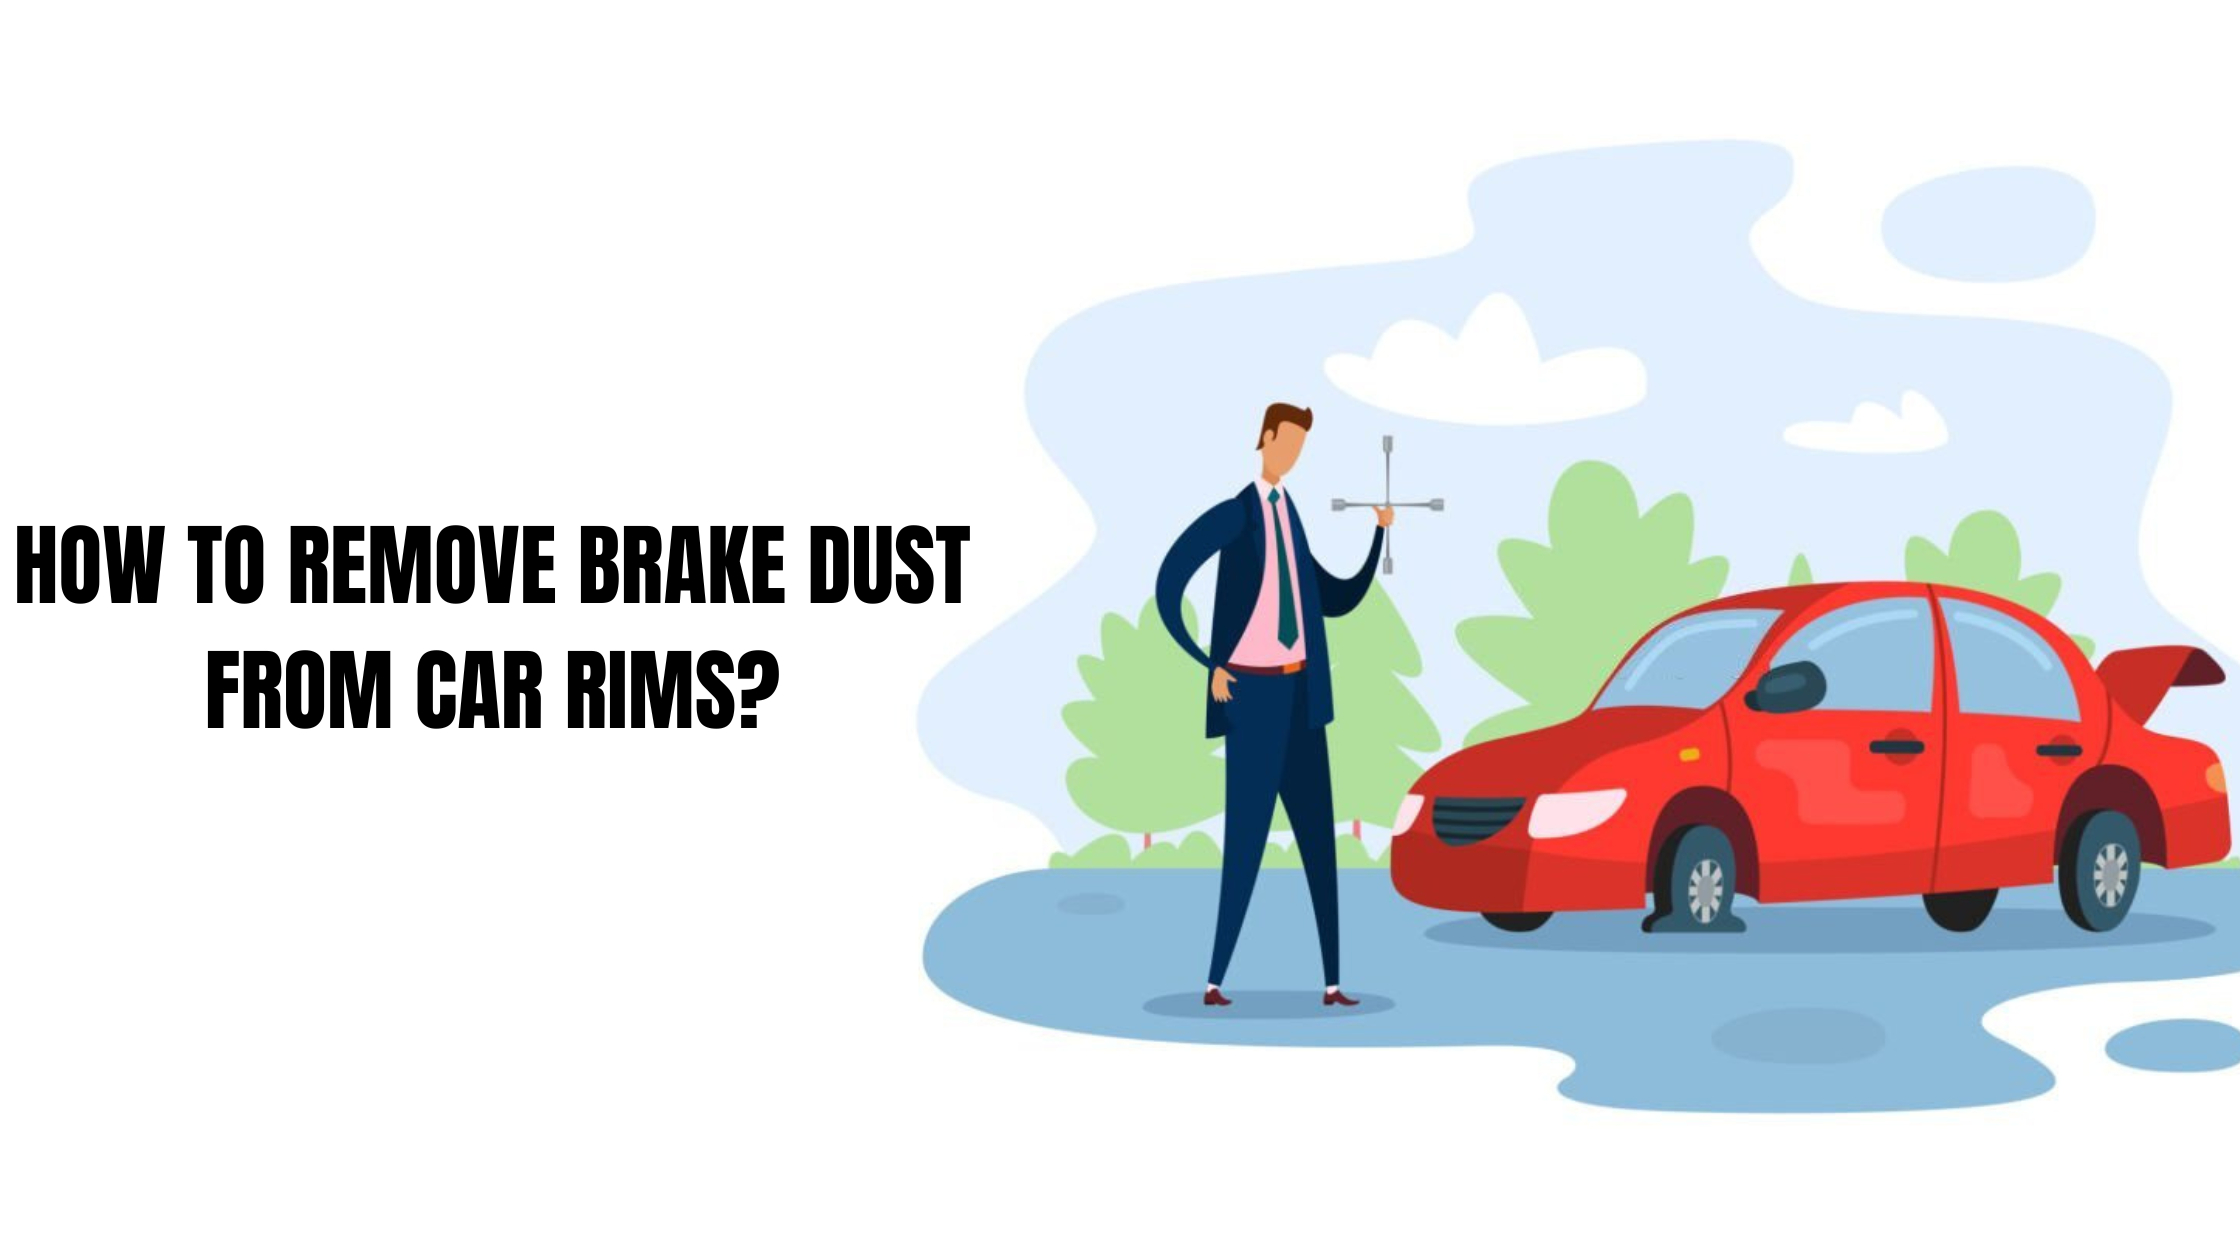 How To Remove Brake Dust From Car Rims?